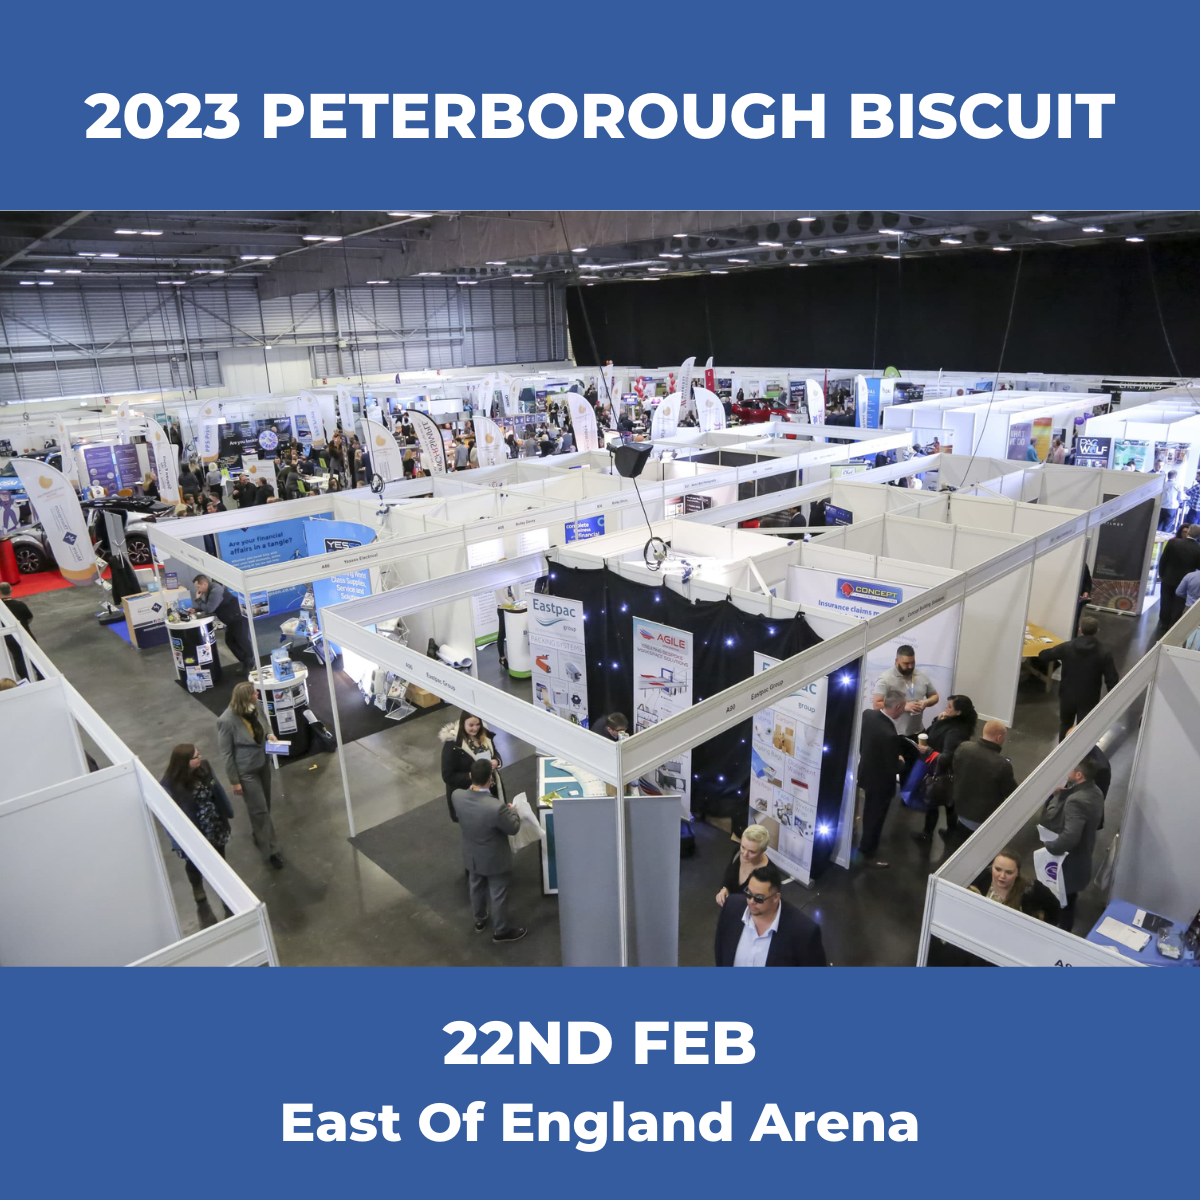 When Is The 2023 Peterborough Biscuit